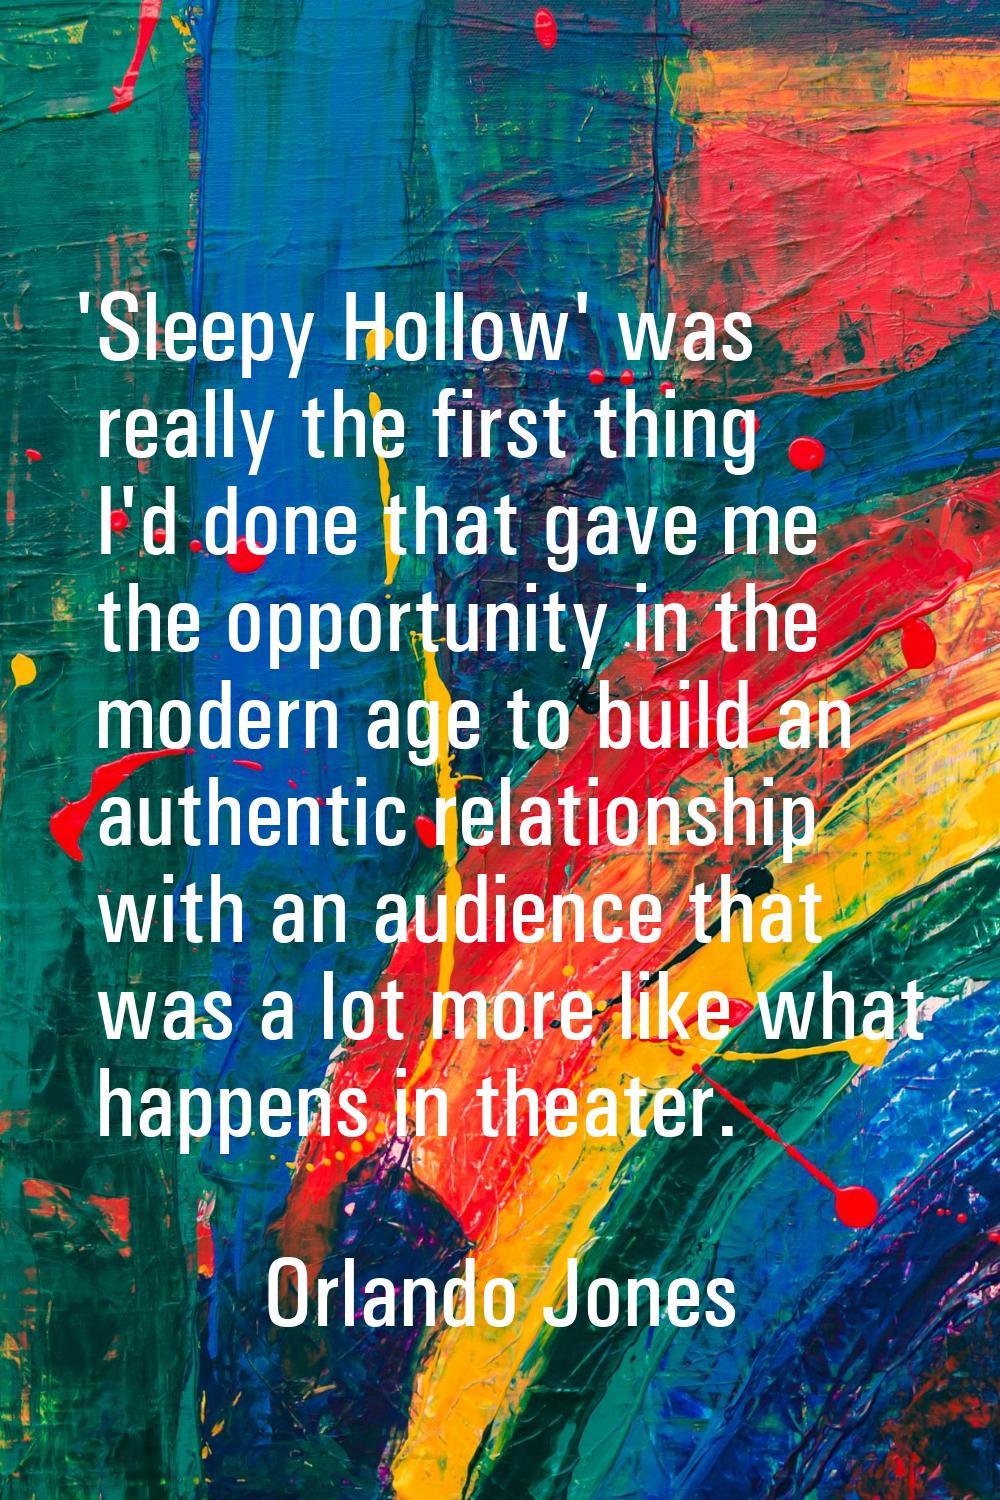 'Sleepy Hollow' was really the first thing I'd done that gave me the opportunity in the modern age 